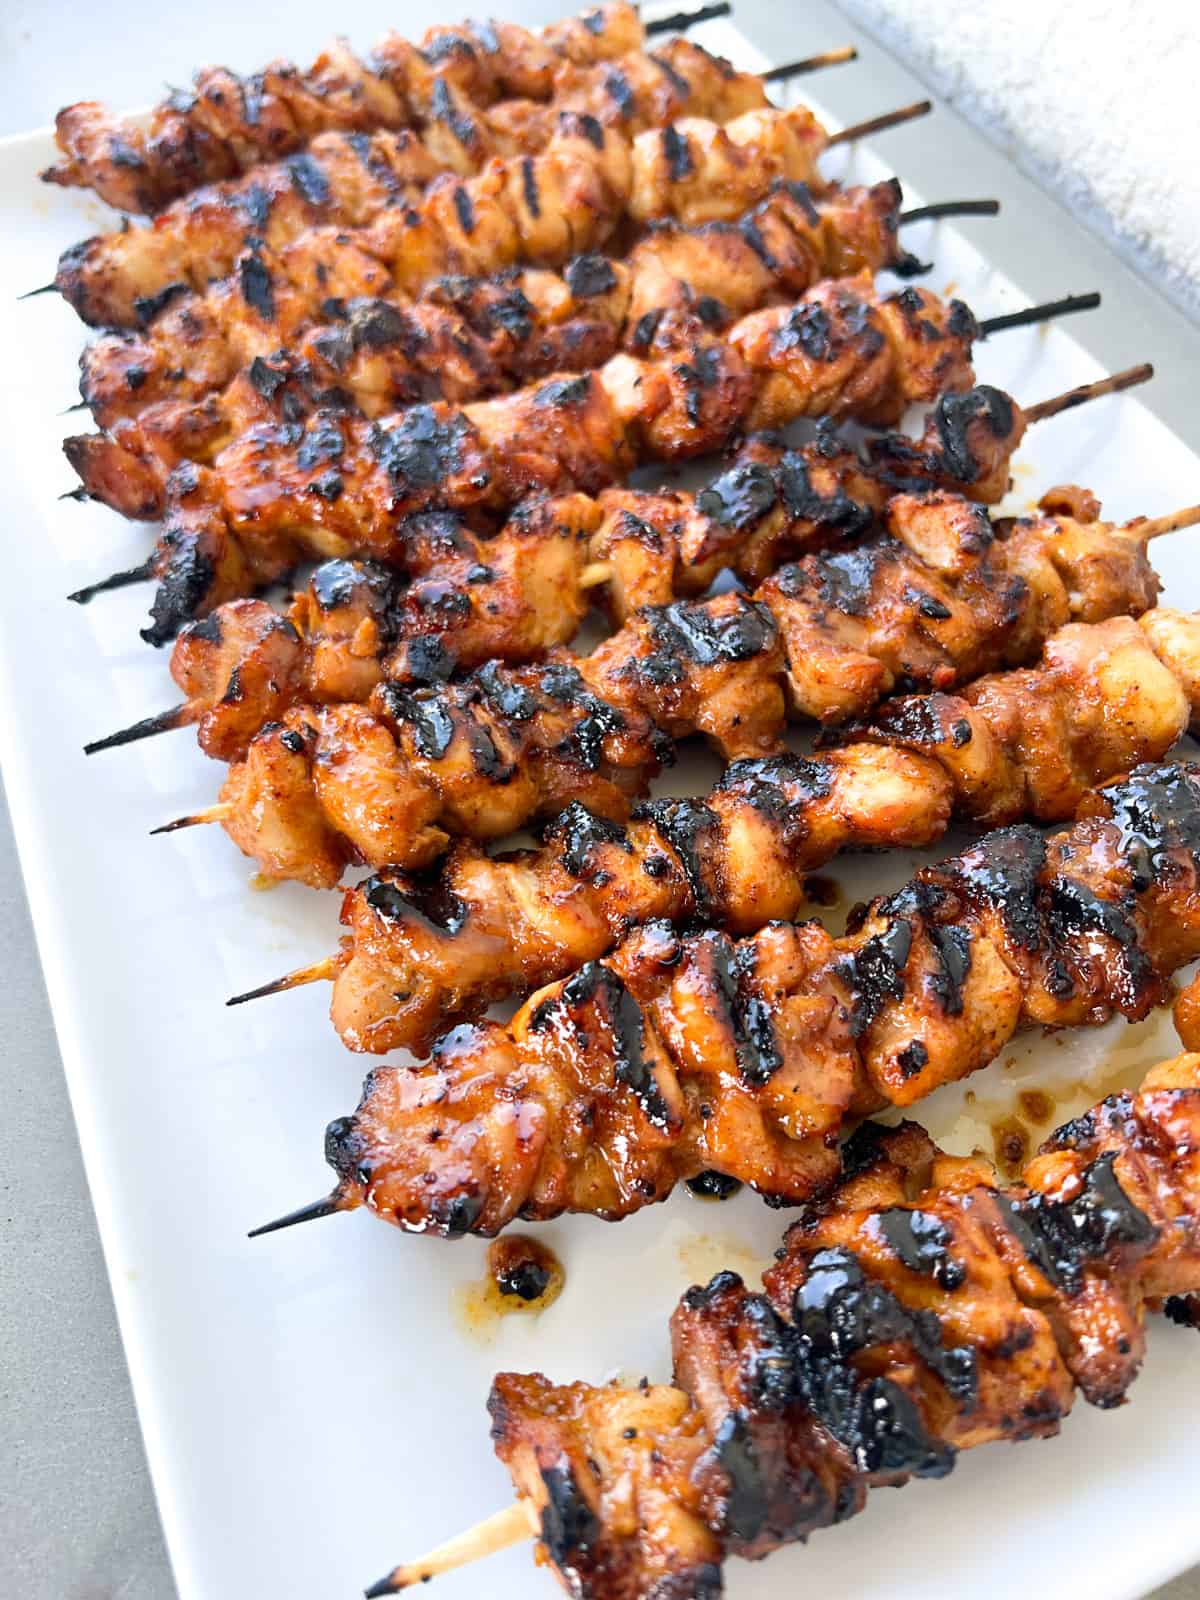 Grilled chicken thigh kabobs on skewers ona plate.